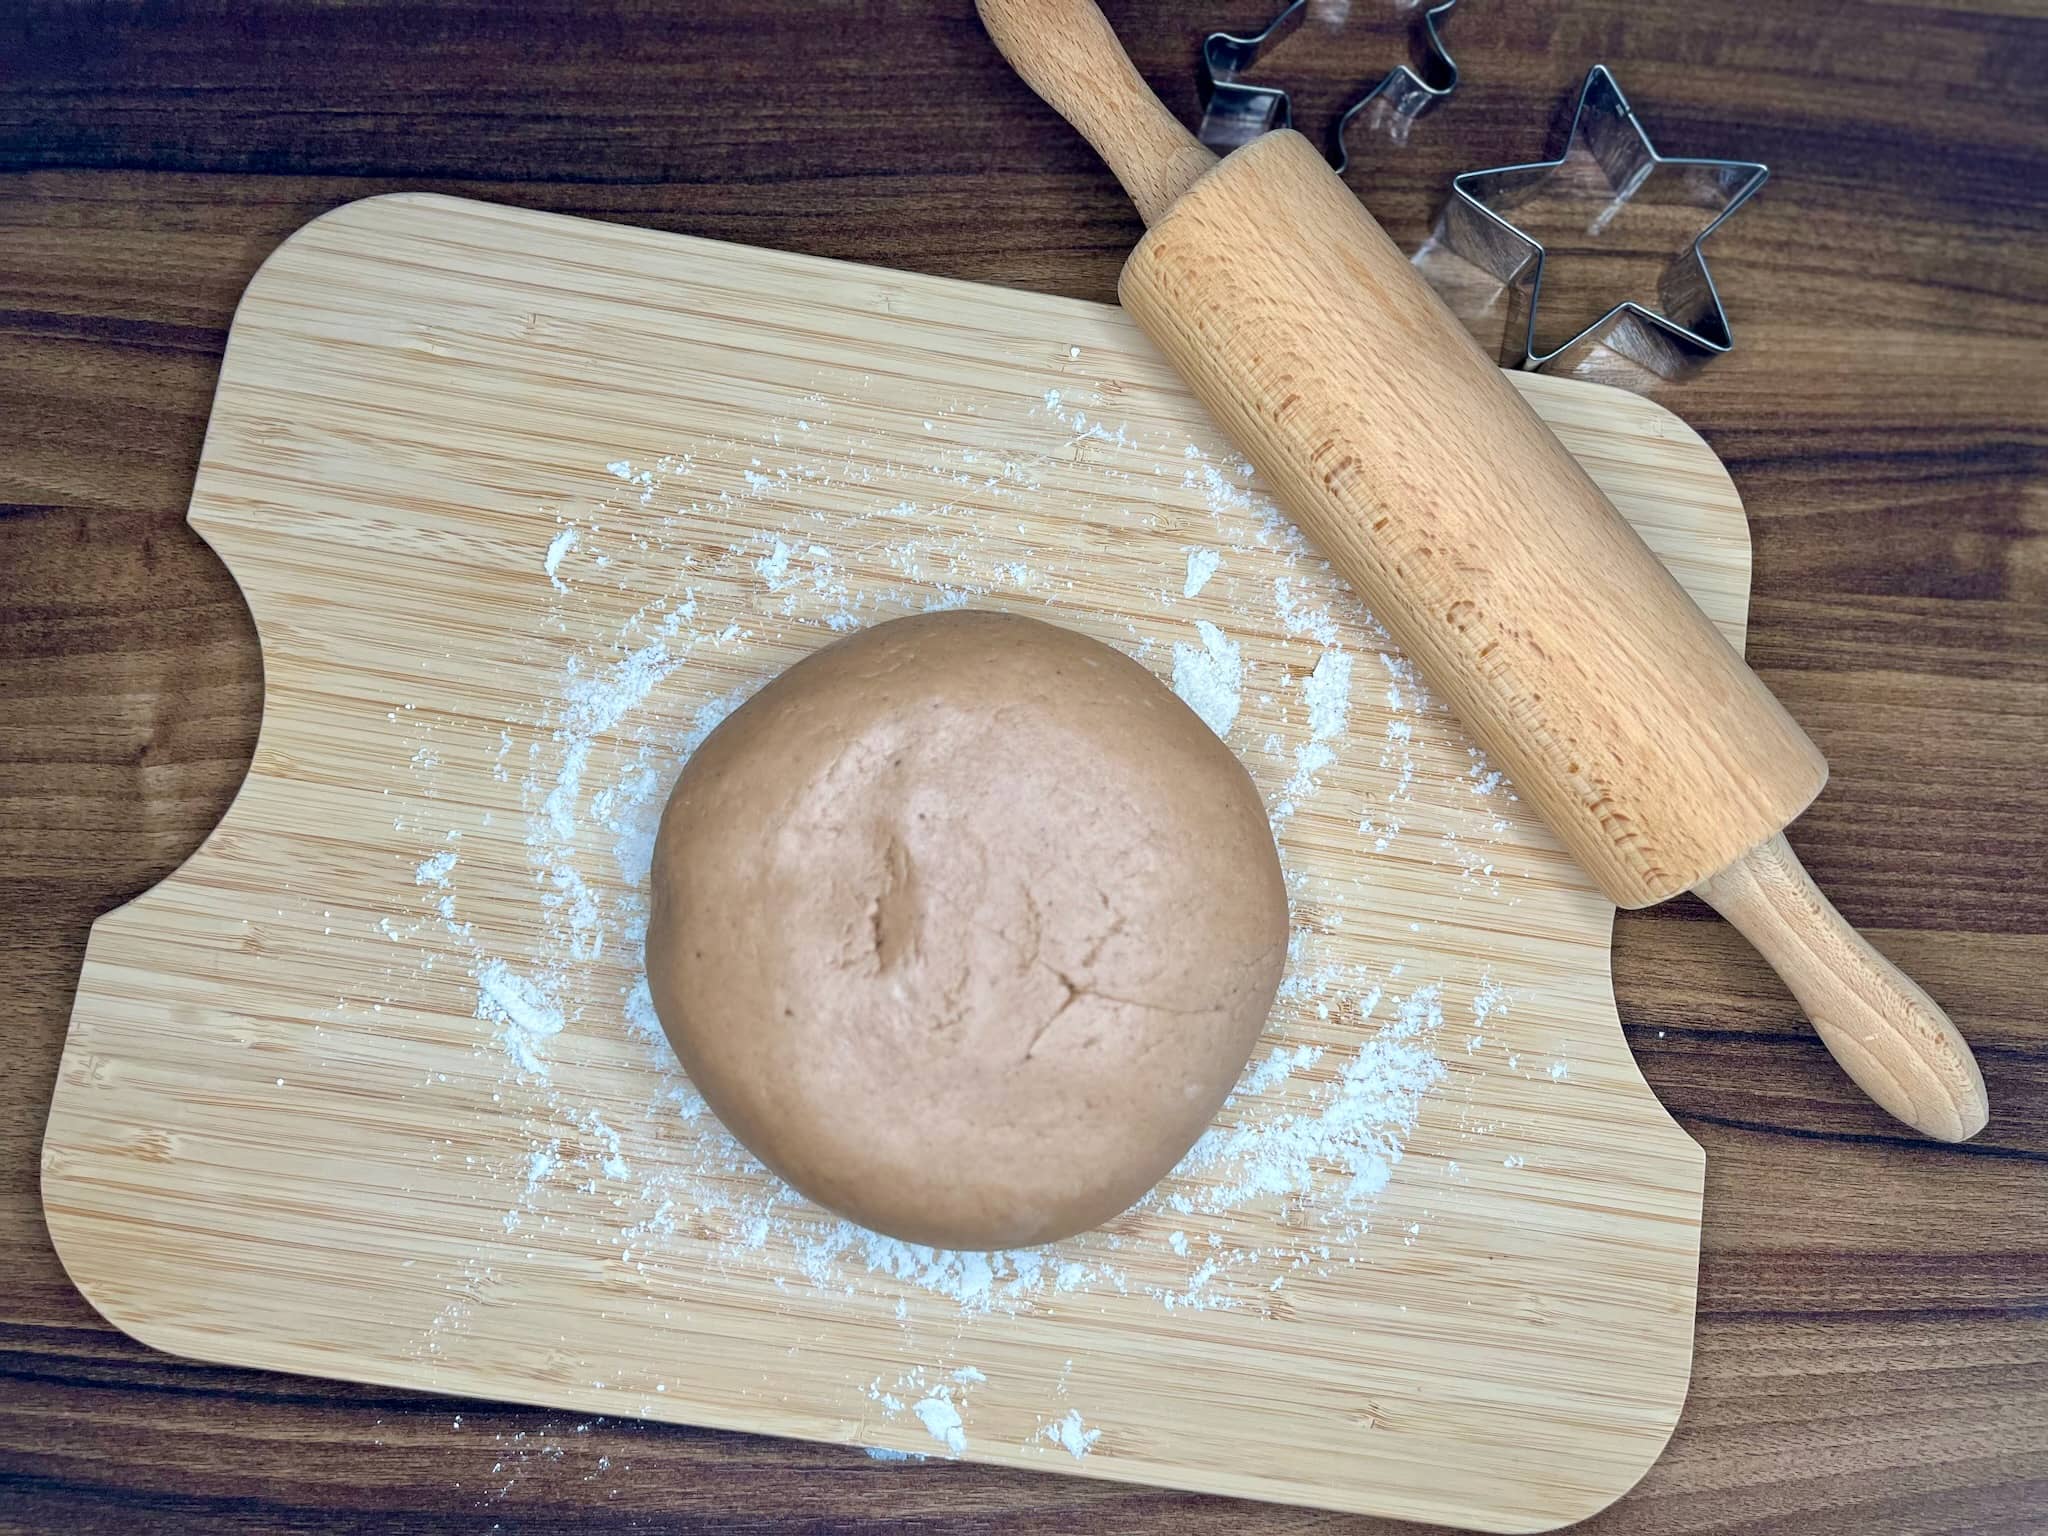 Gingerbread Cookie Dough on the chopping board